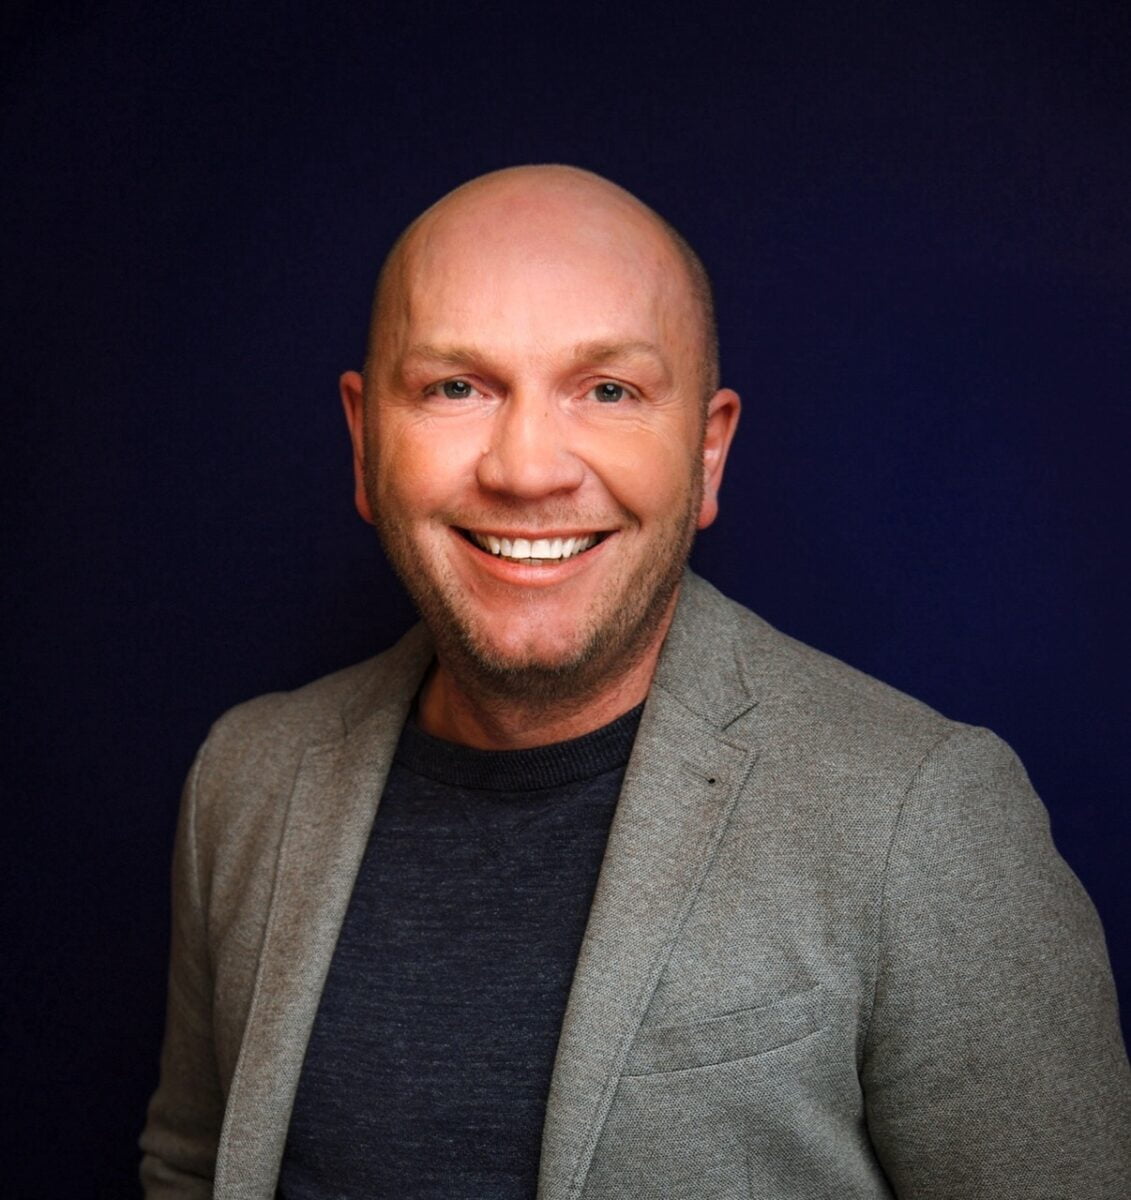 Q&A: Paul Ridings, Global Director of Growth for People at OneAdvanced